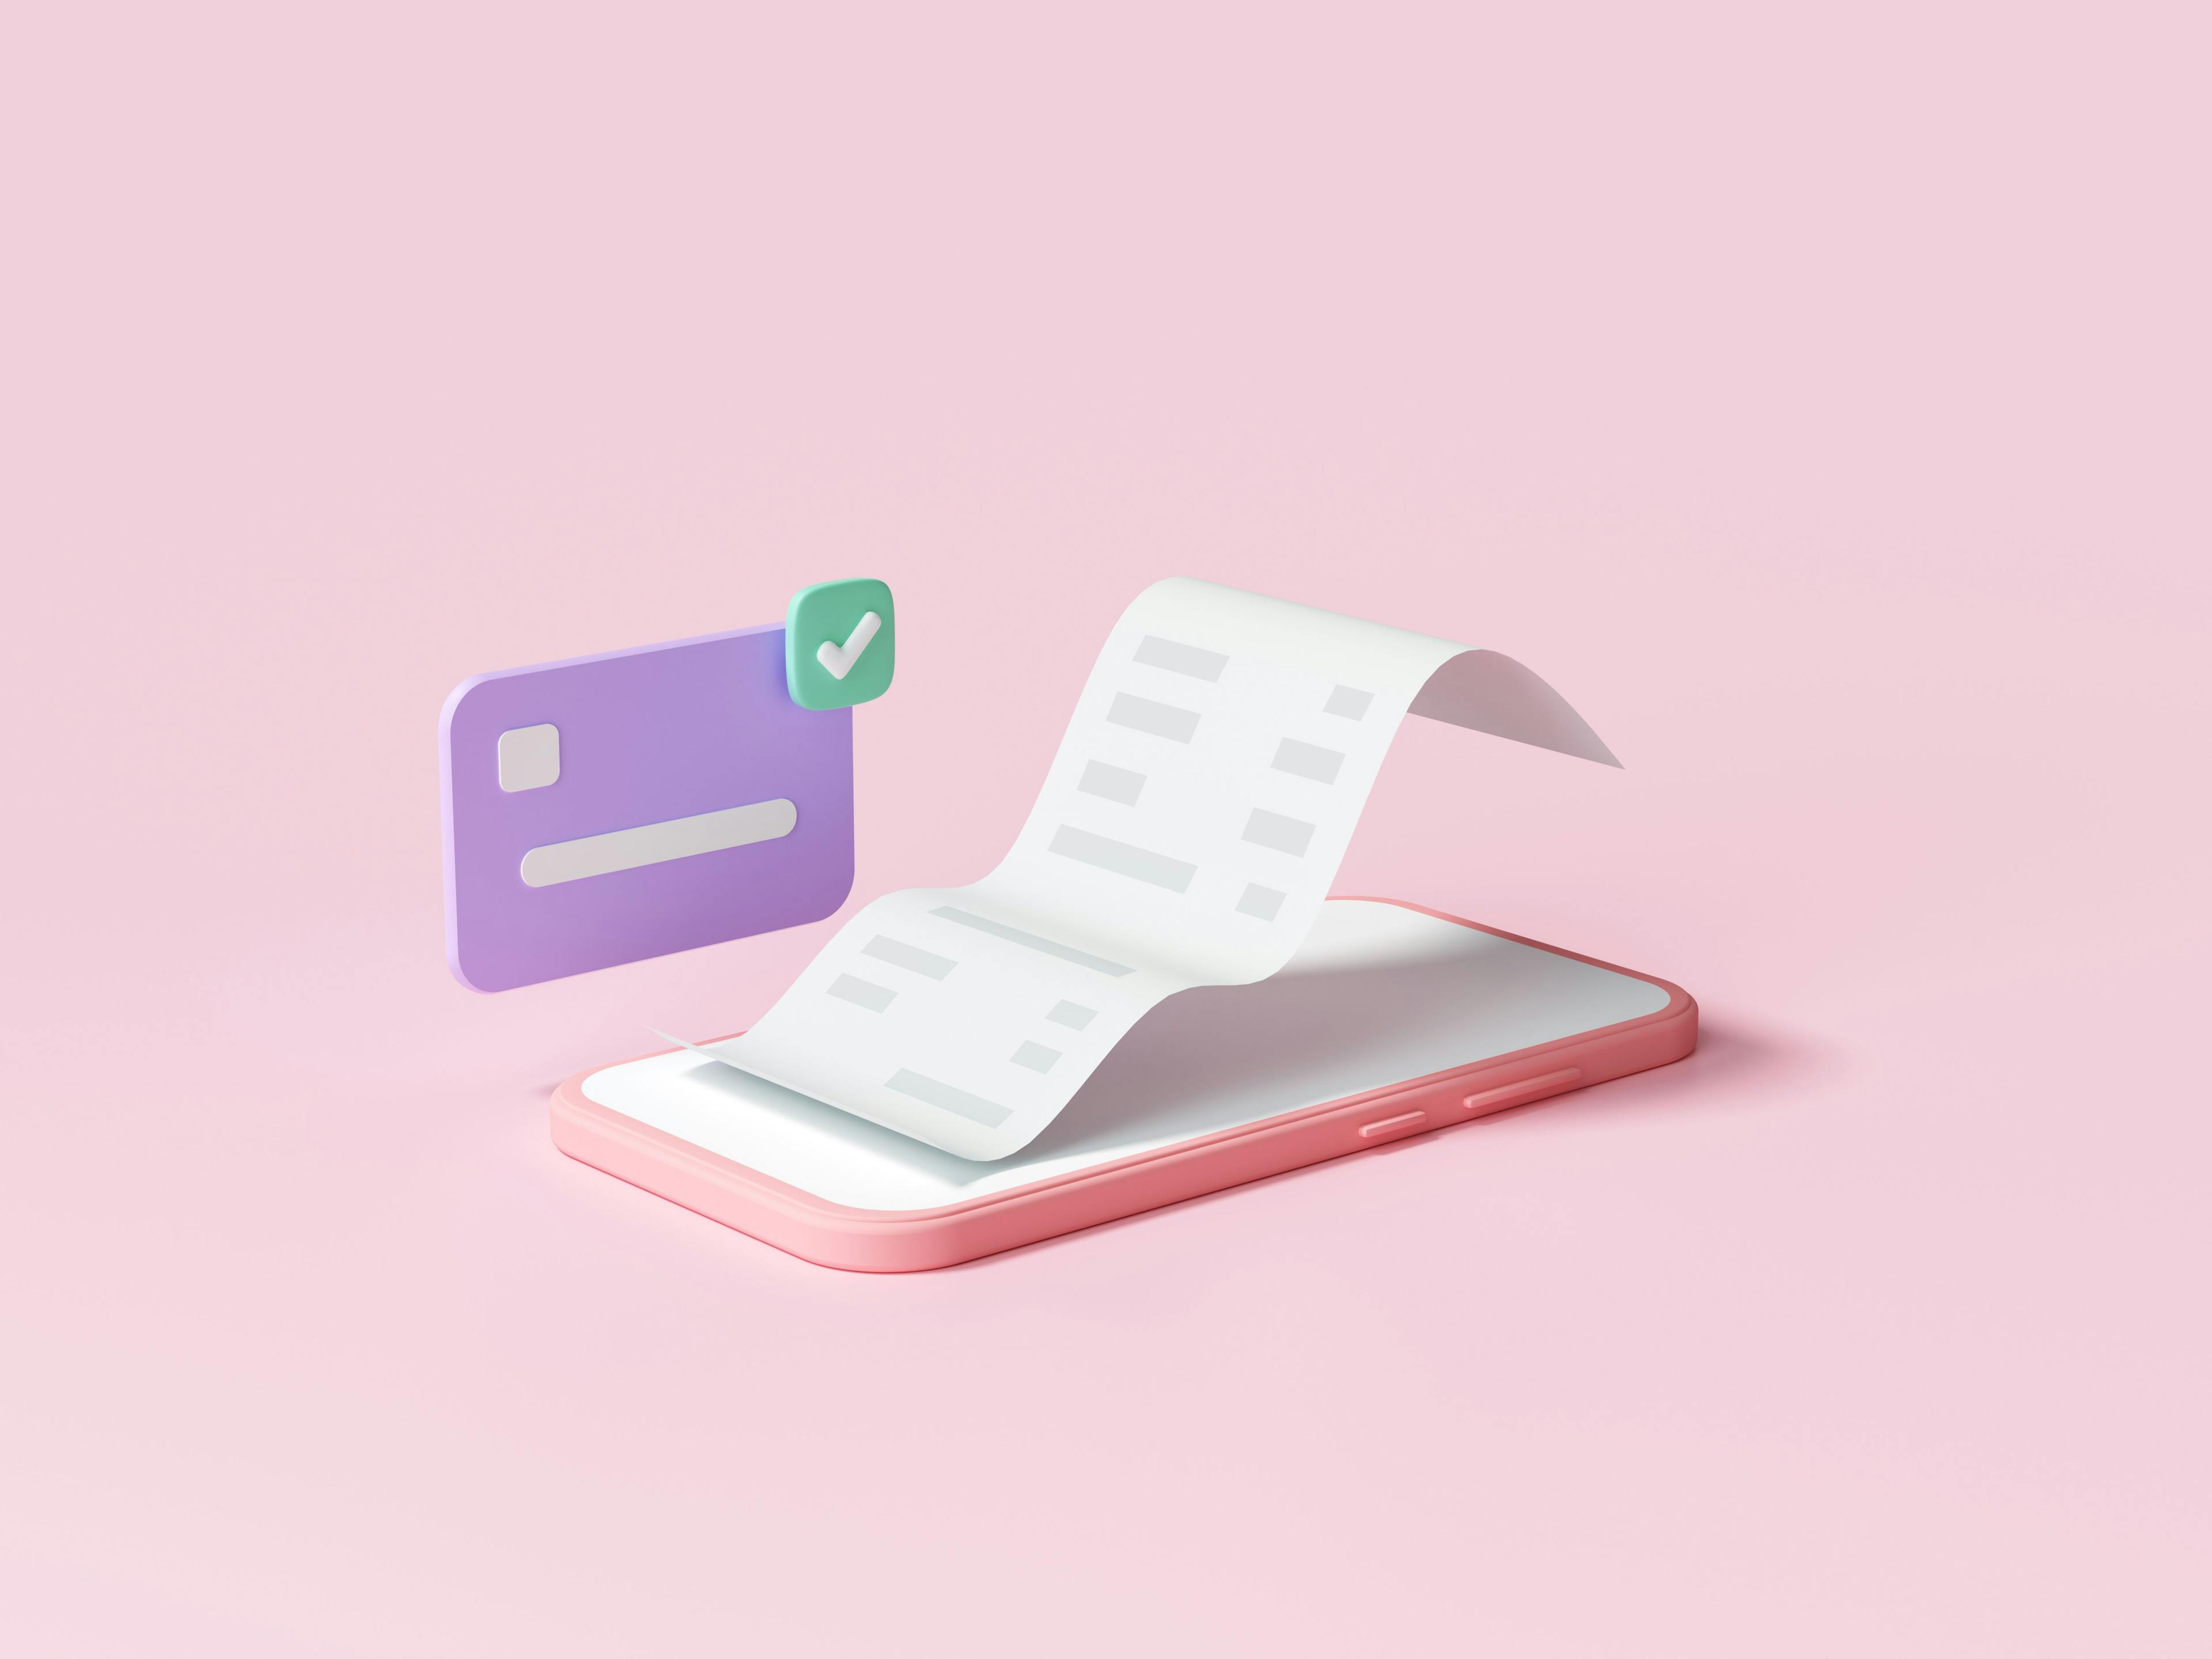 pastel pink background with a mobile phone and receipt and bank card to indicate that a payment was just made and is meant to depict payments with Shopify Payments